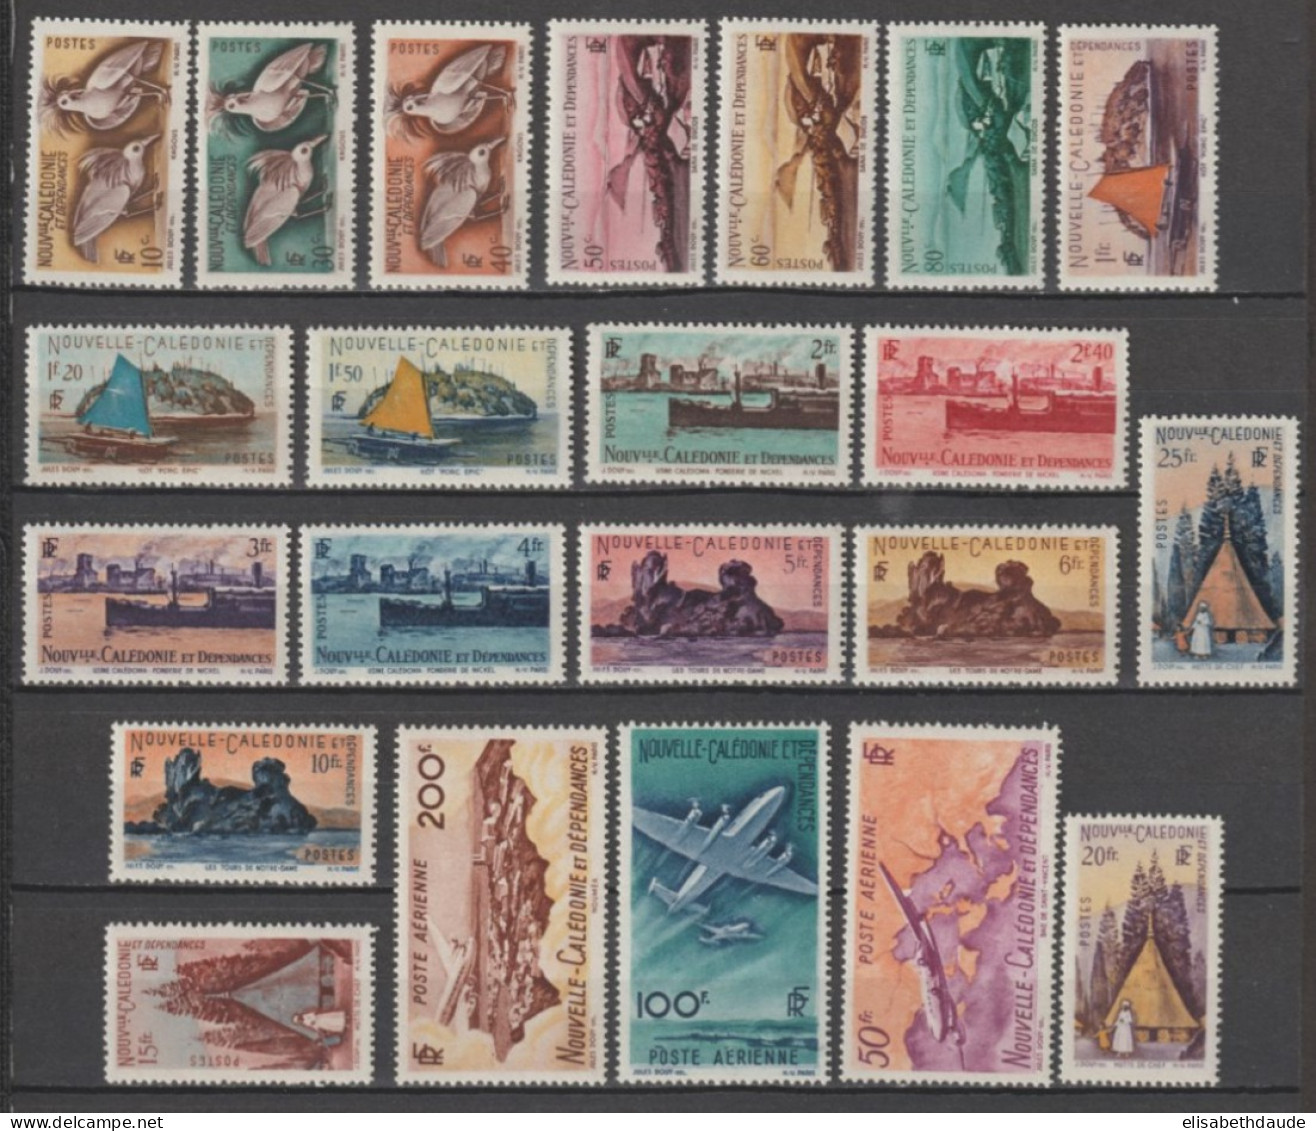 NOUVELLE CALEDONIE - 1948 ANNEES COMPLETES Avec POSTE AERIENNE - YVERT N°259/277+A61/63 ** MNH - COTE = 117 EUR - Full Years